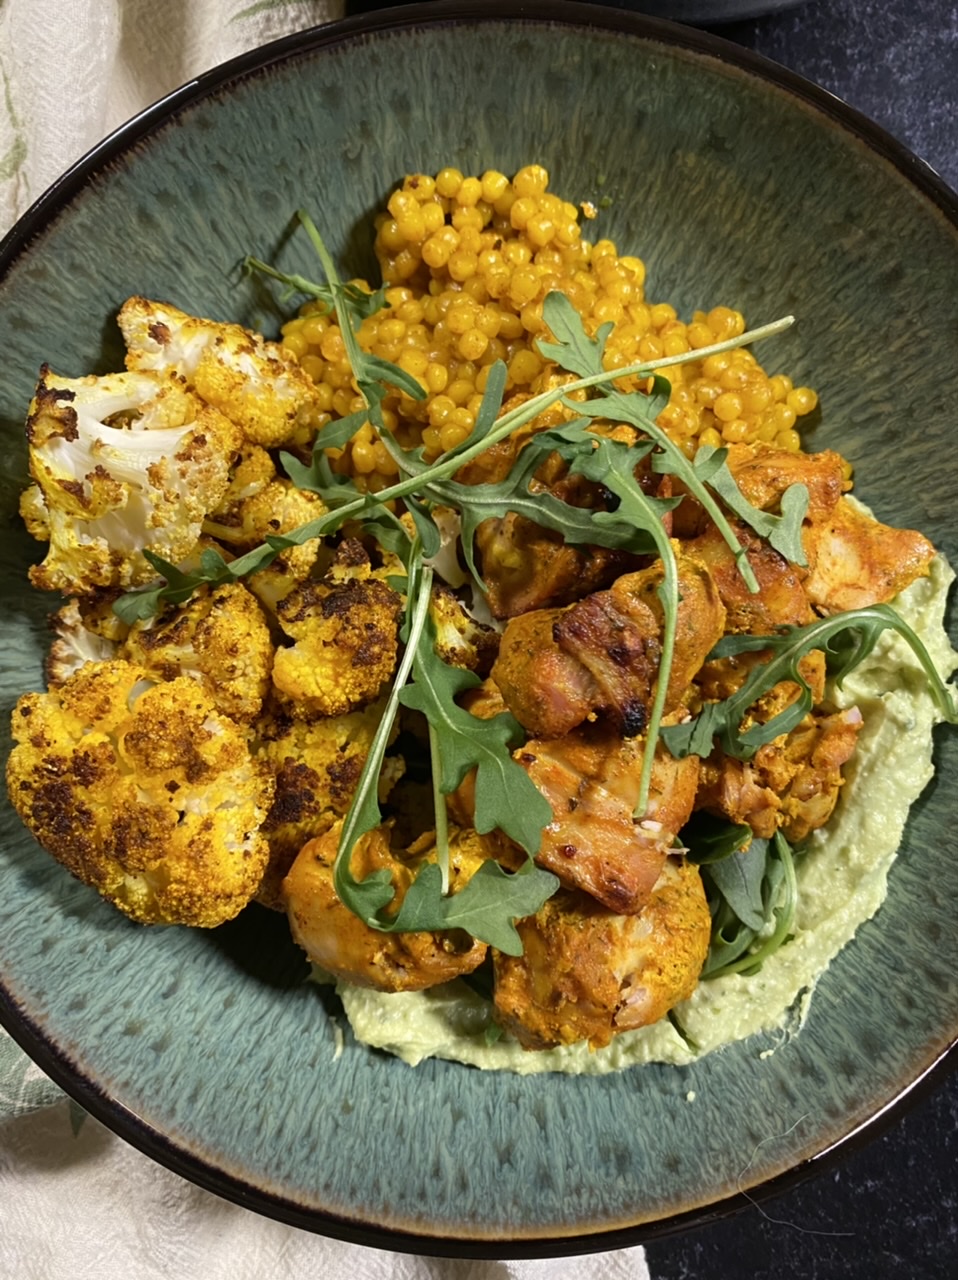 84AFB991 98C5 4BD6 B82A 711DE697070A - Moroccan-Style Chicken “Shawarma” with Golden Cauliflower, Turmeric Pearl Couscous, & Whipped Avocado Feta